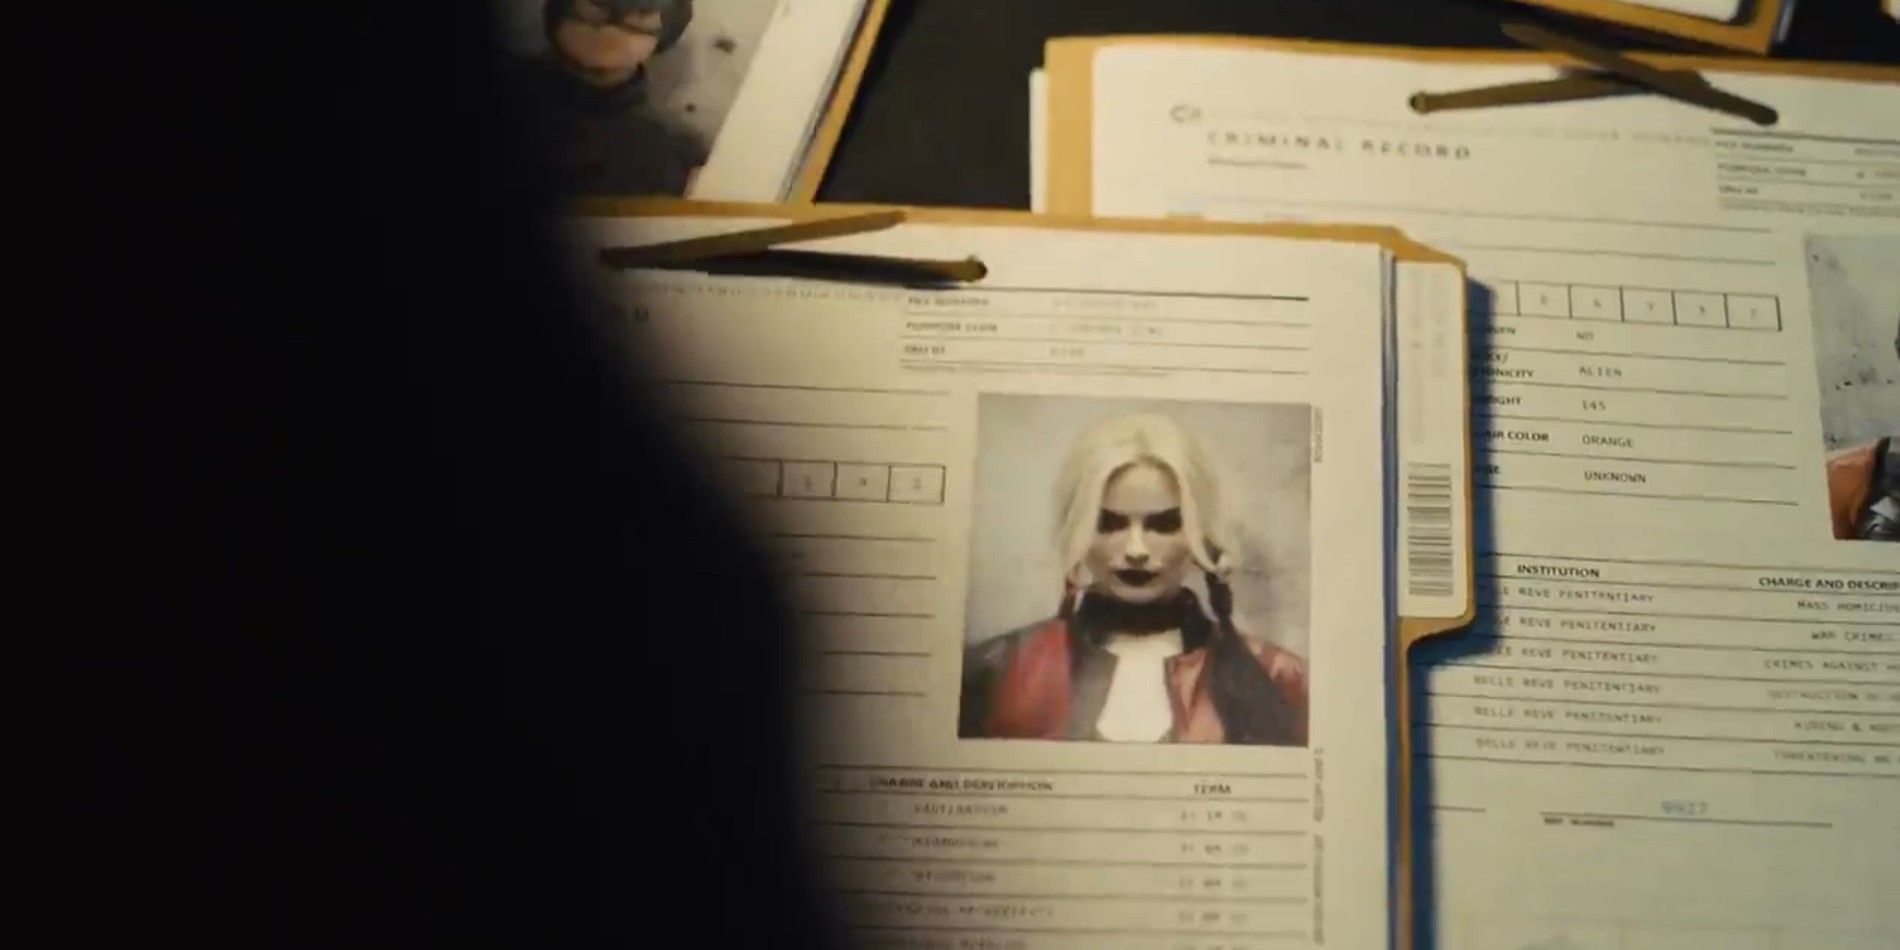 Harley Quinn file in The Suicide Squad